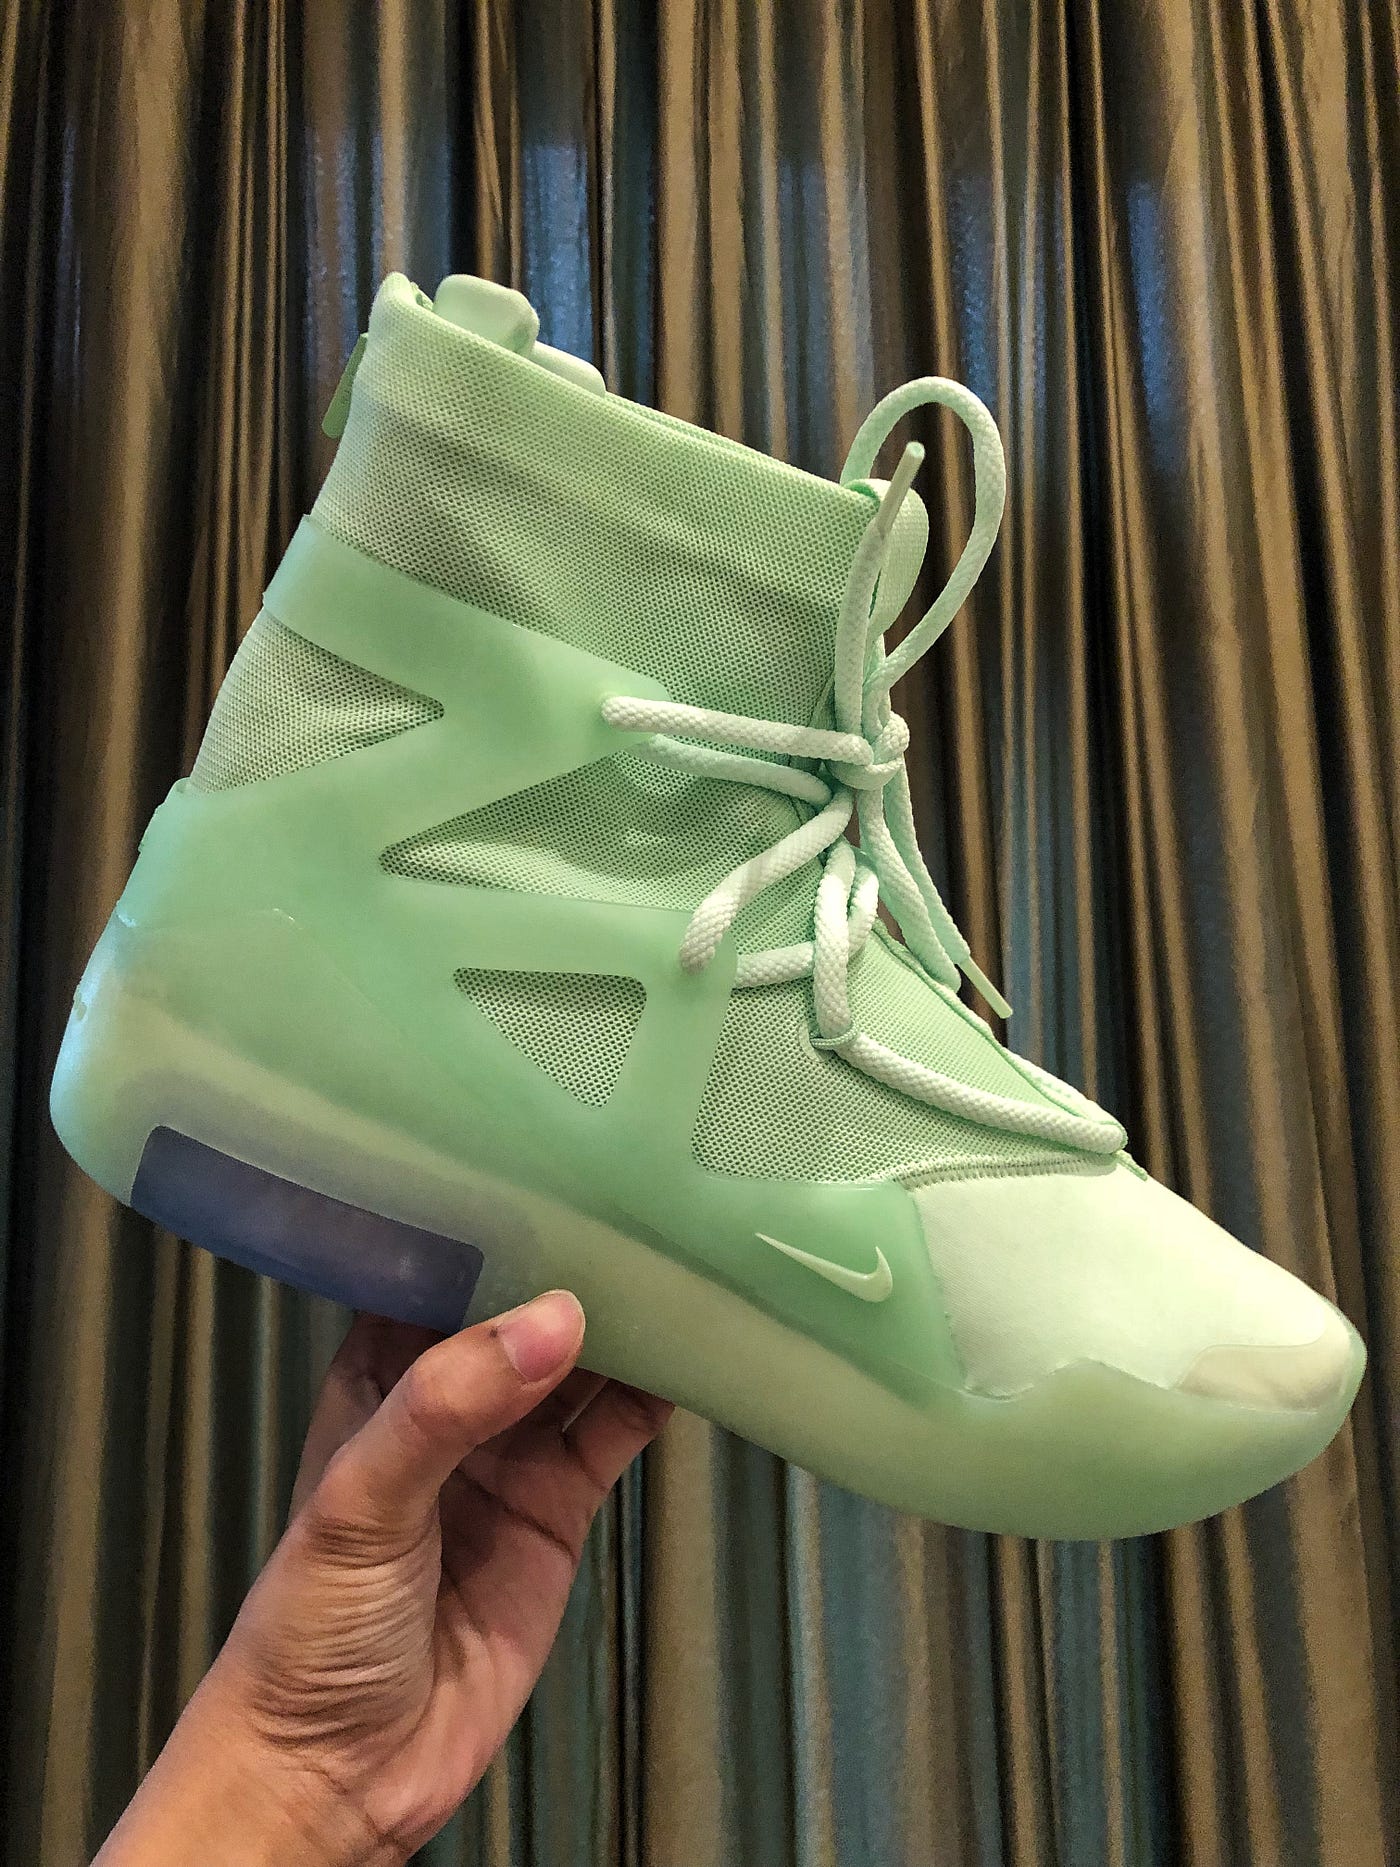 In-Depth Sneaker Review: Nike Air Fear Of God 1 Frosted Spruce